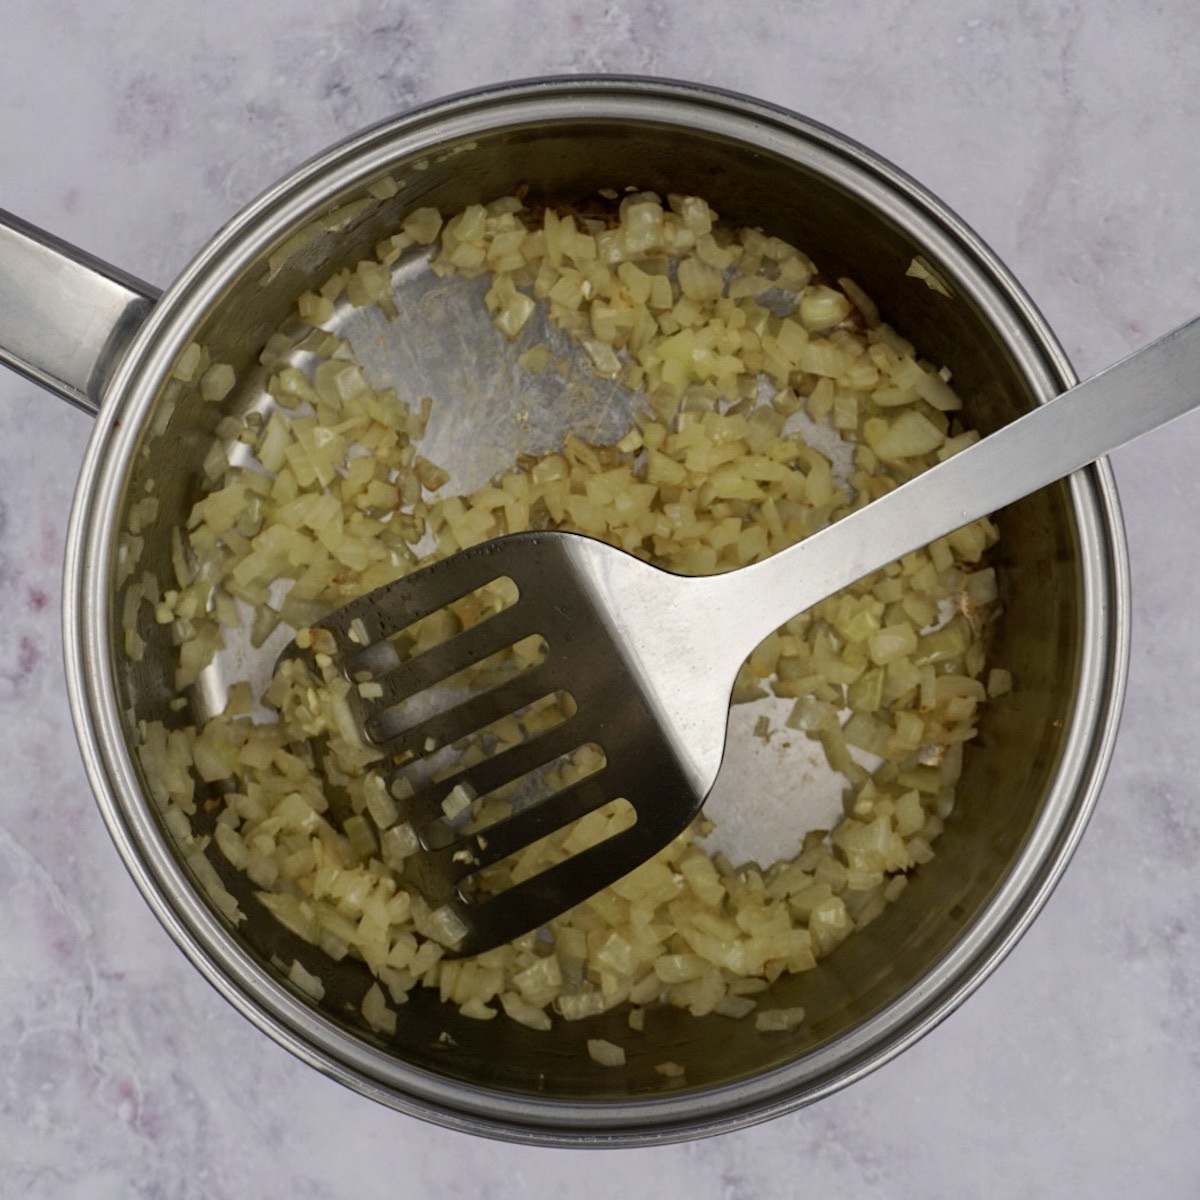 Cooking onion and garlic in a pan